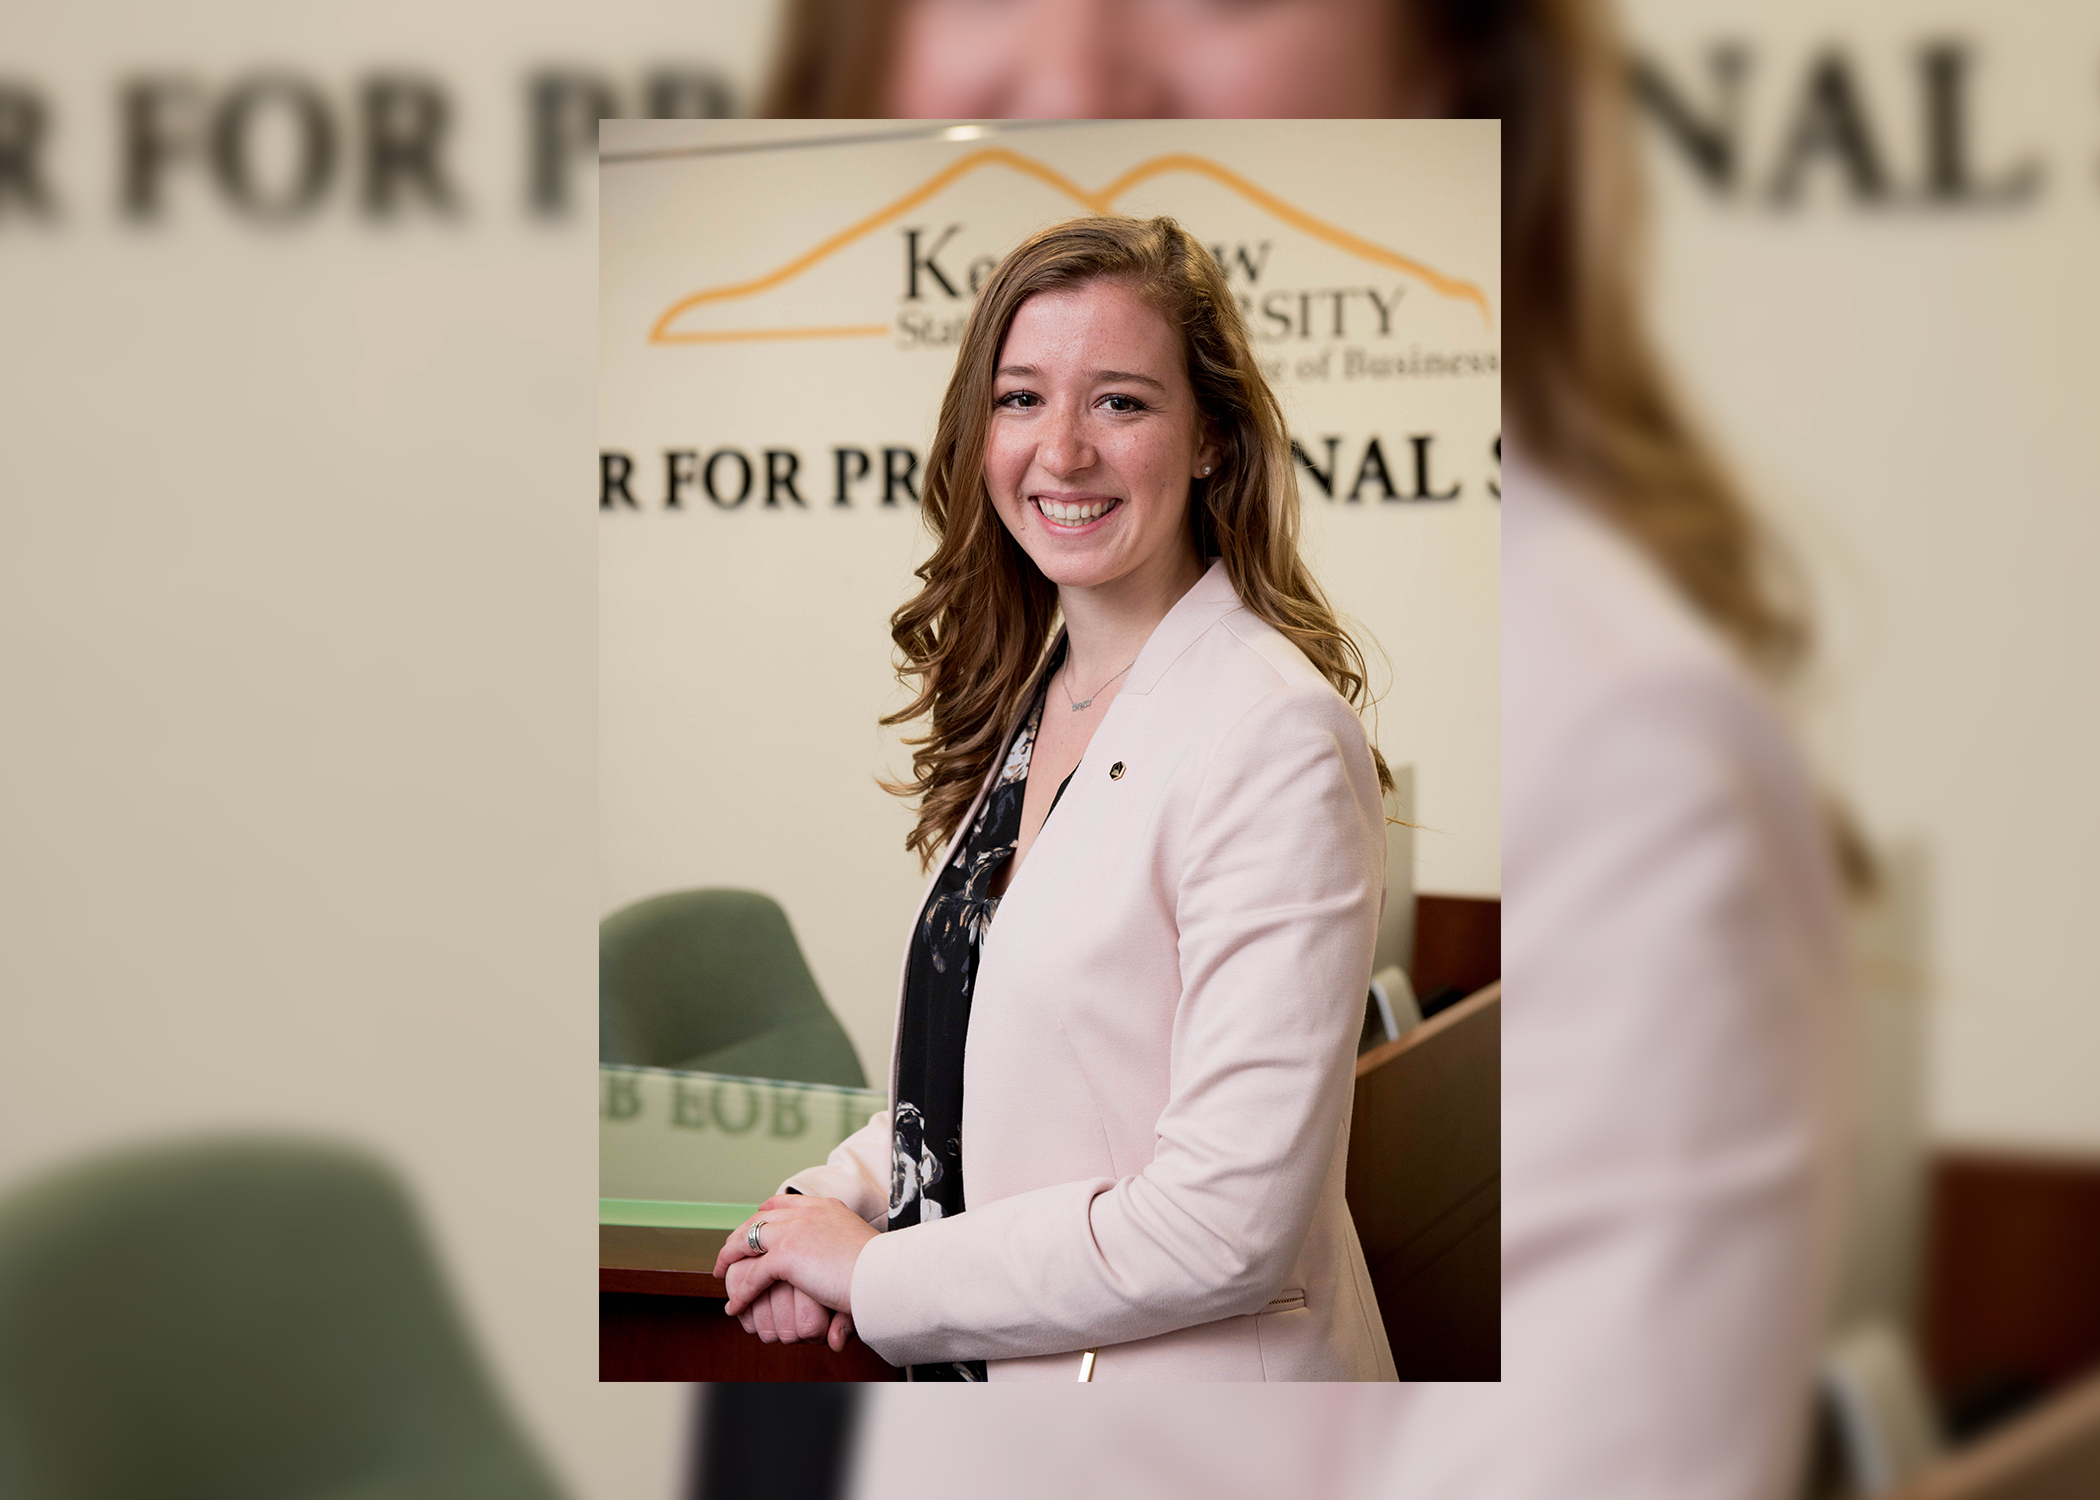 New SGA president elected following emergency meeting, change in officers